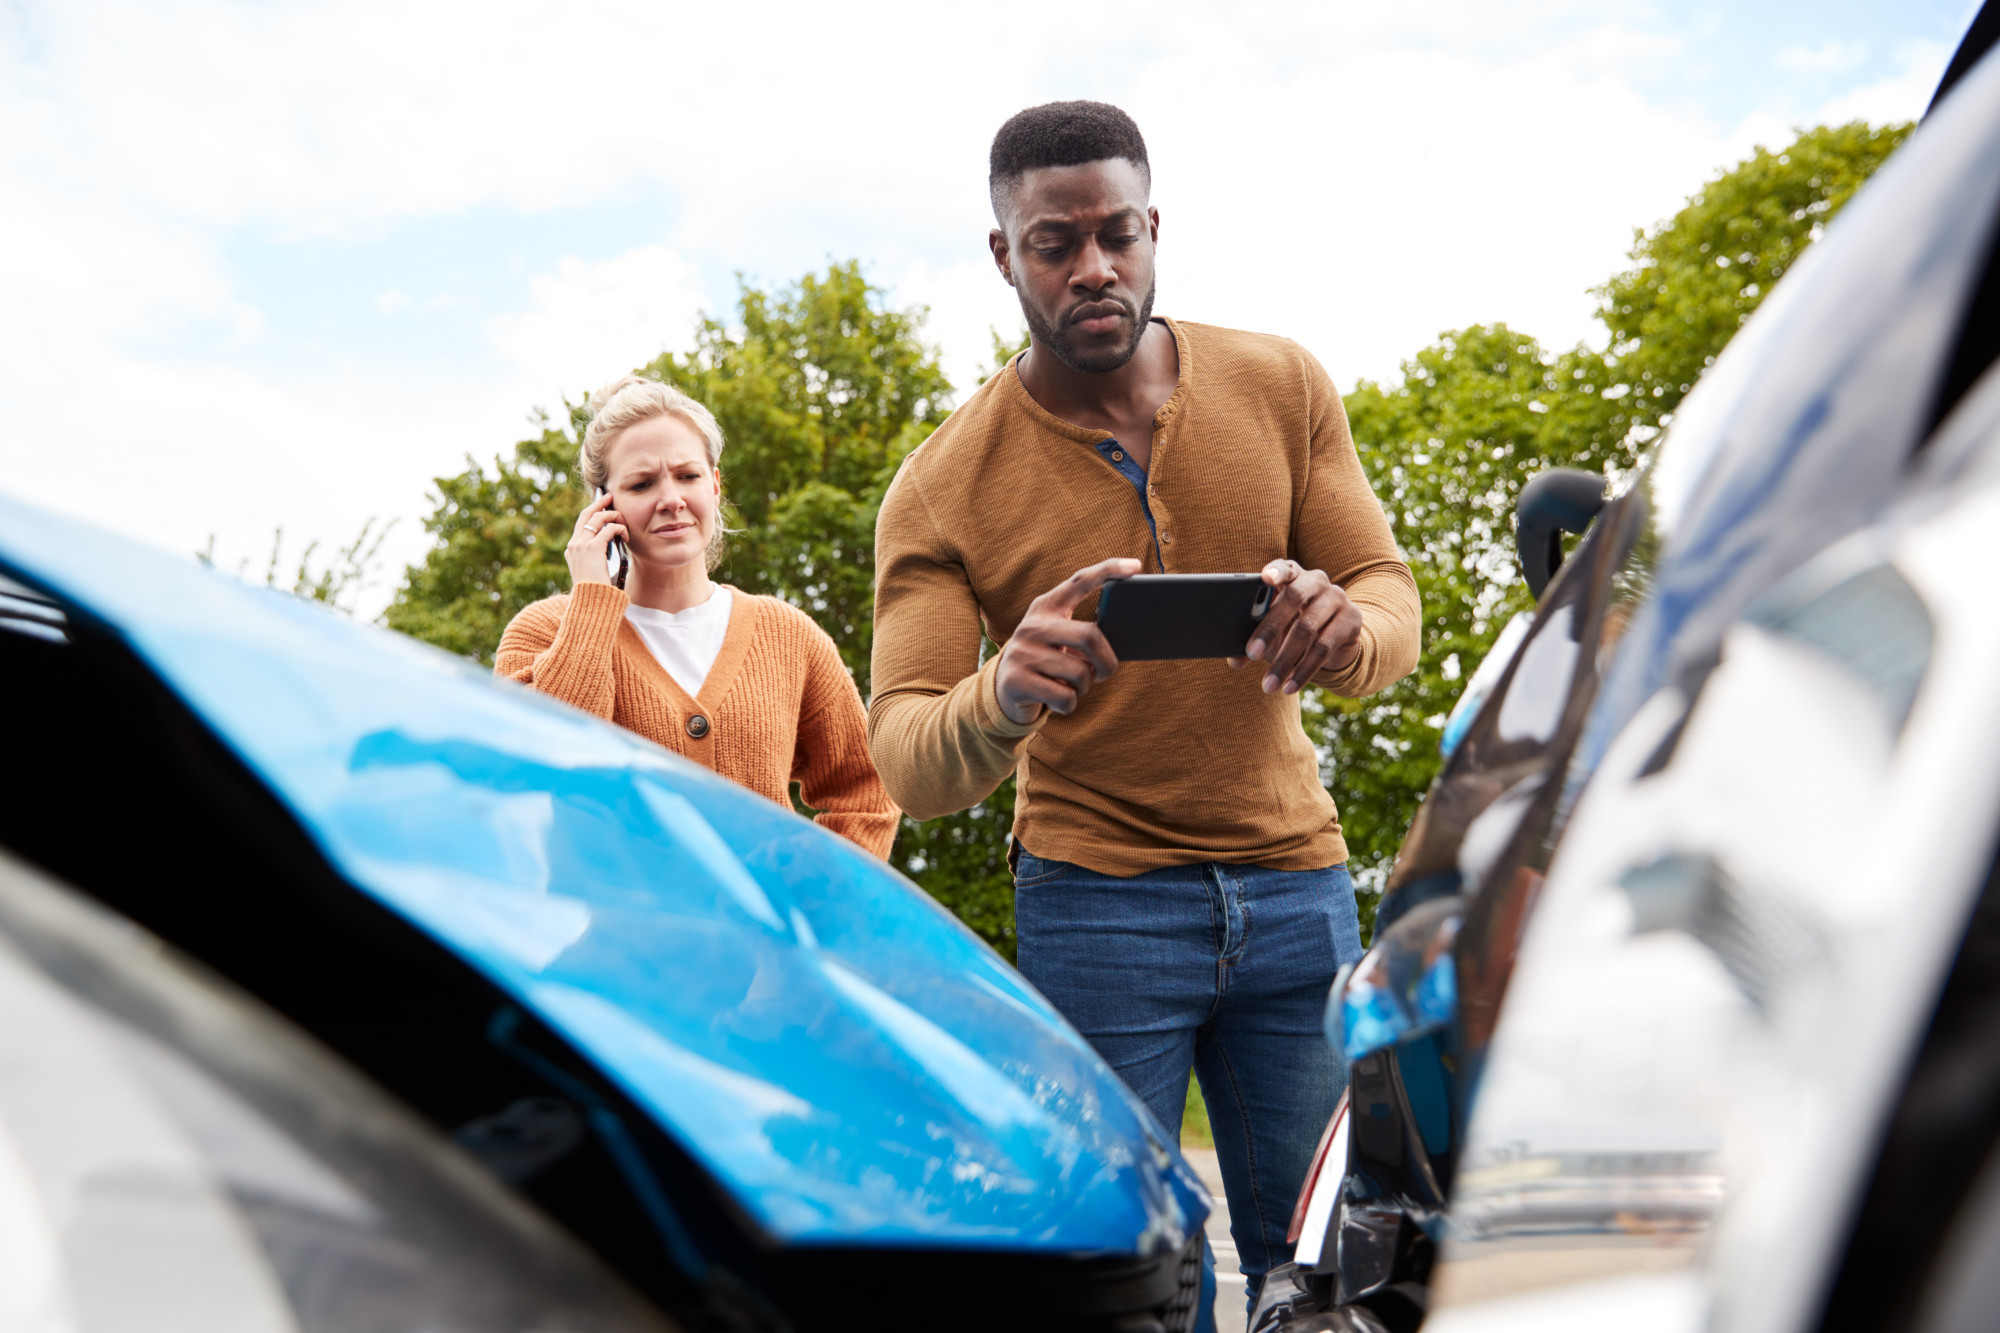 Accepting money can be both good and bad, depending on the situation. Read on to learn what to do when the at-fault driver wants to pay out of pocket here.